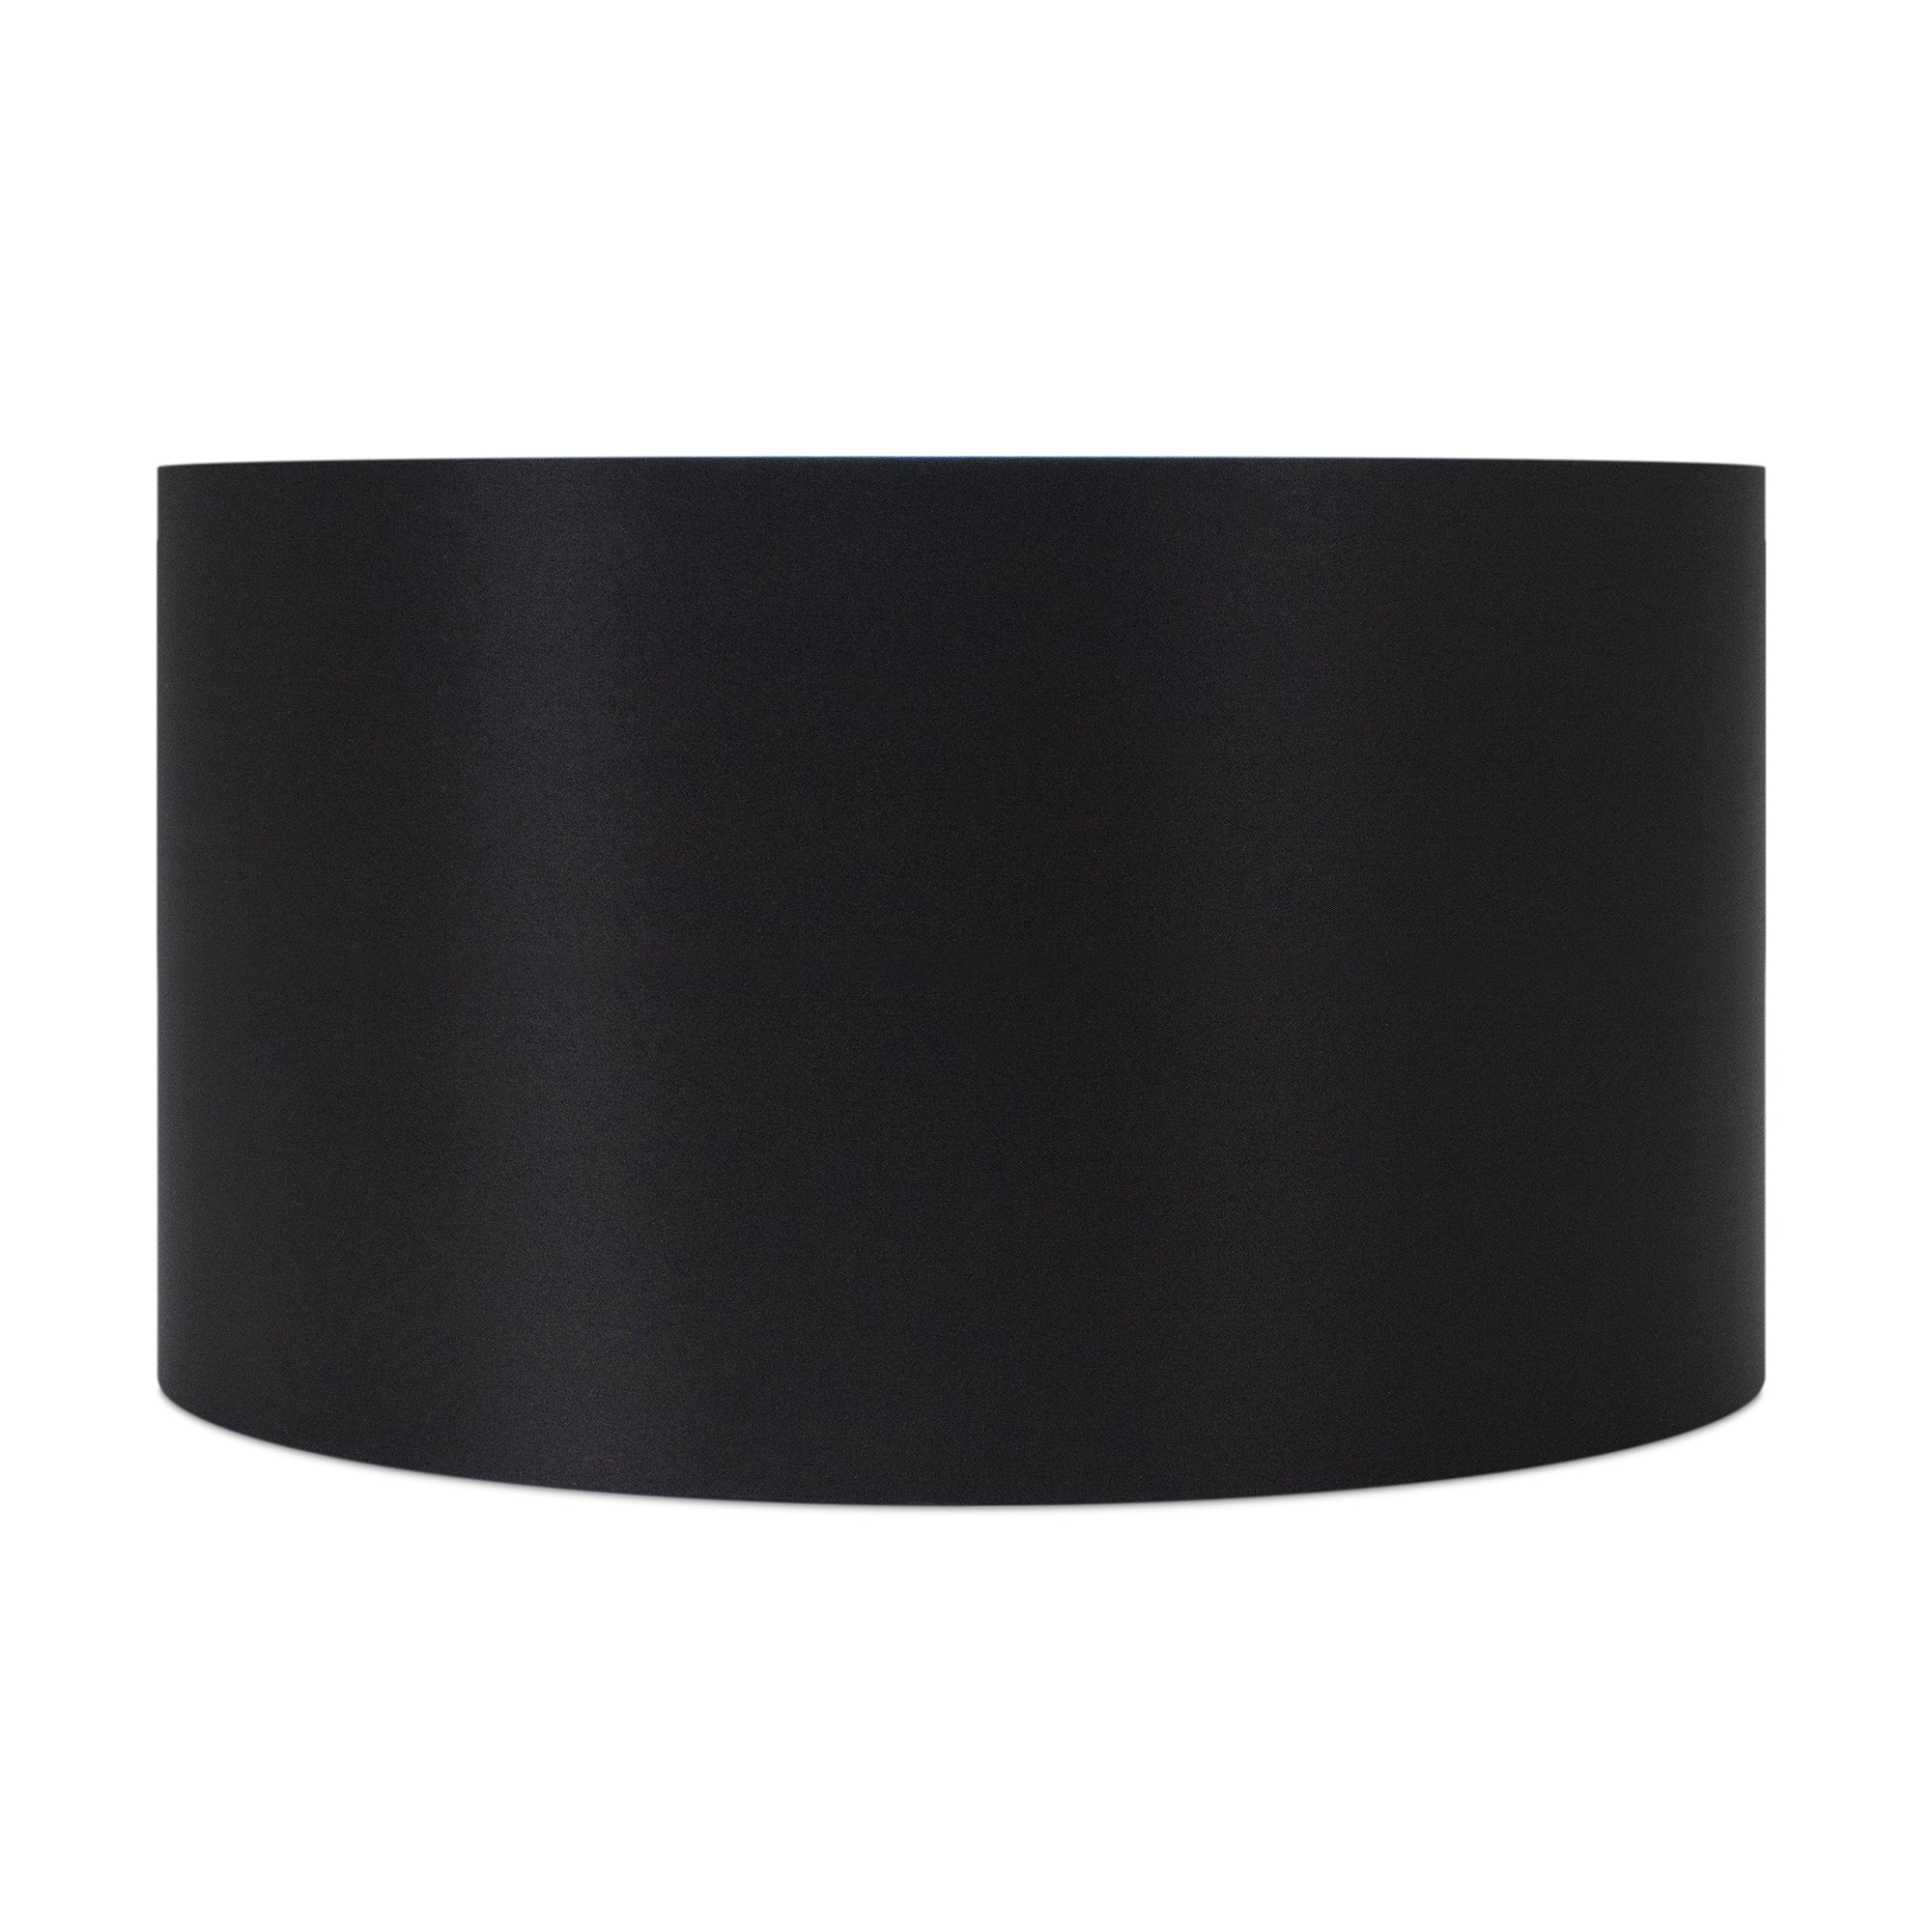 Round Black Linen Drum Shade 17" x 17" x 11" - Couture Lamps